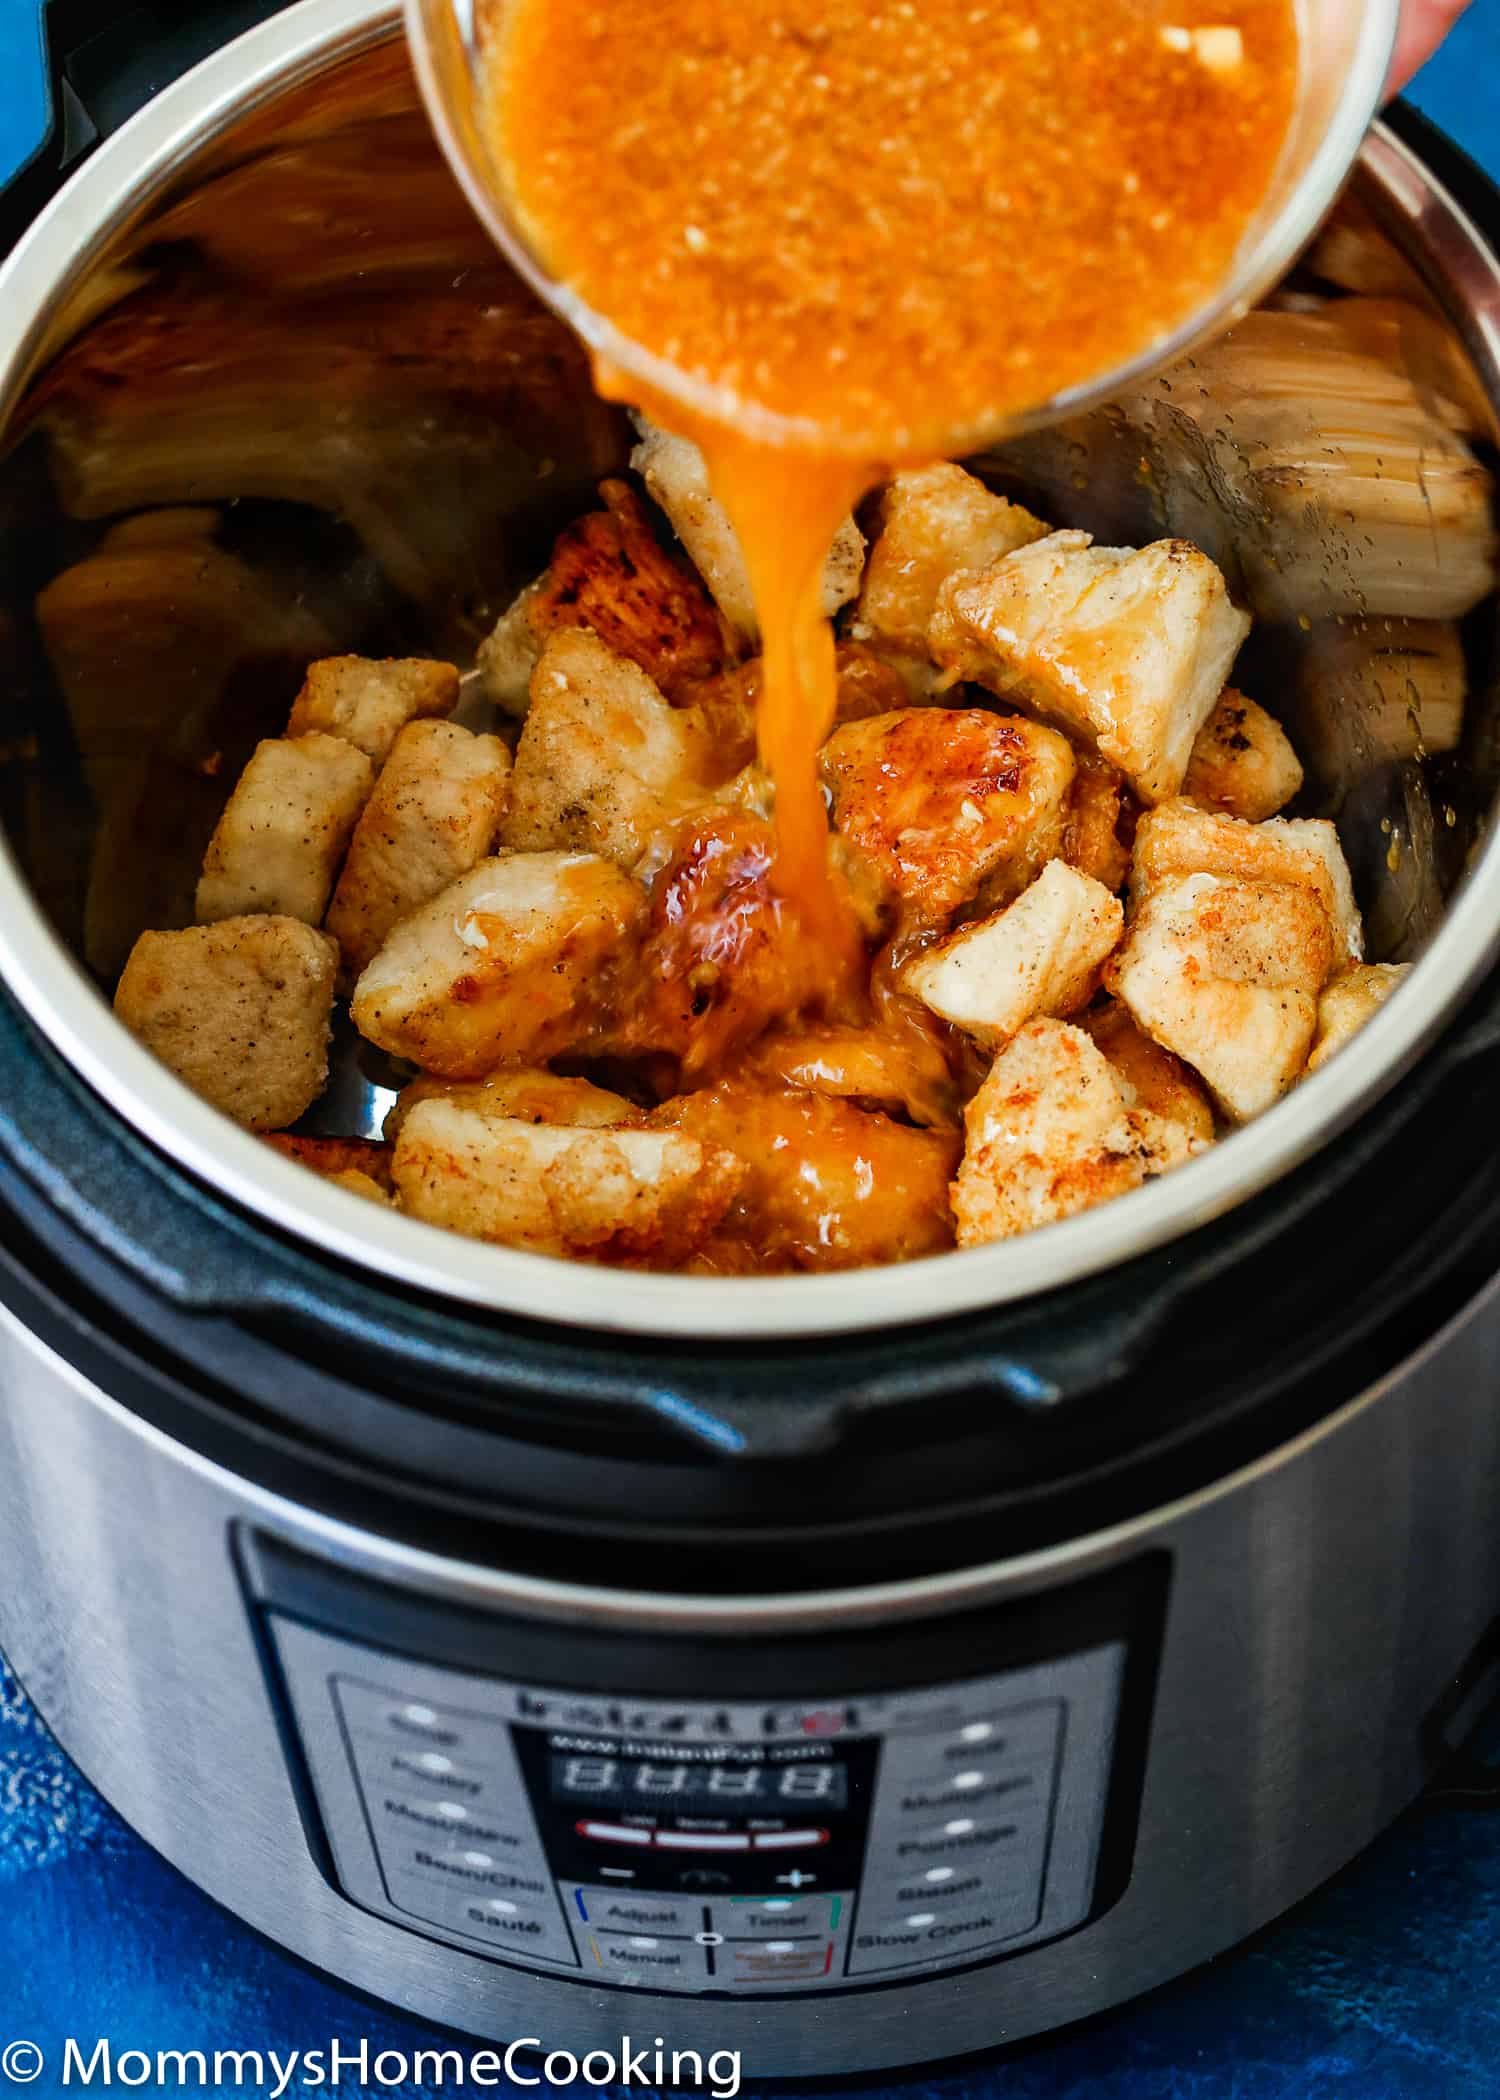 orange sauce being poured over chicken in a pressure cooker pot